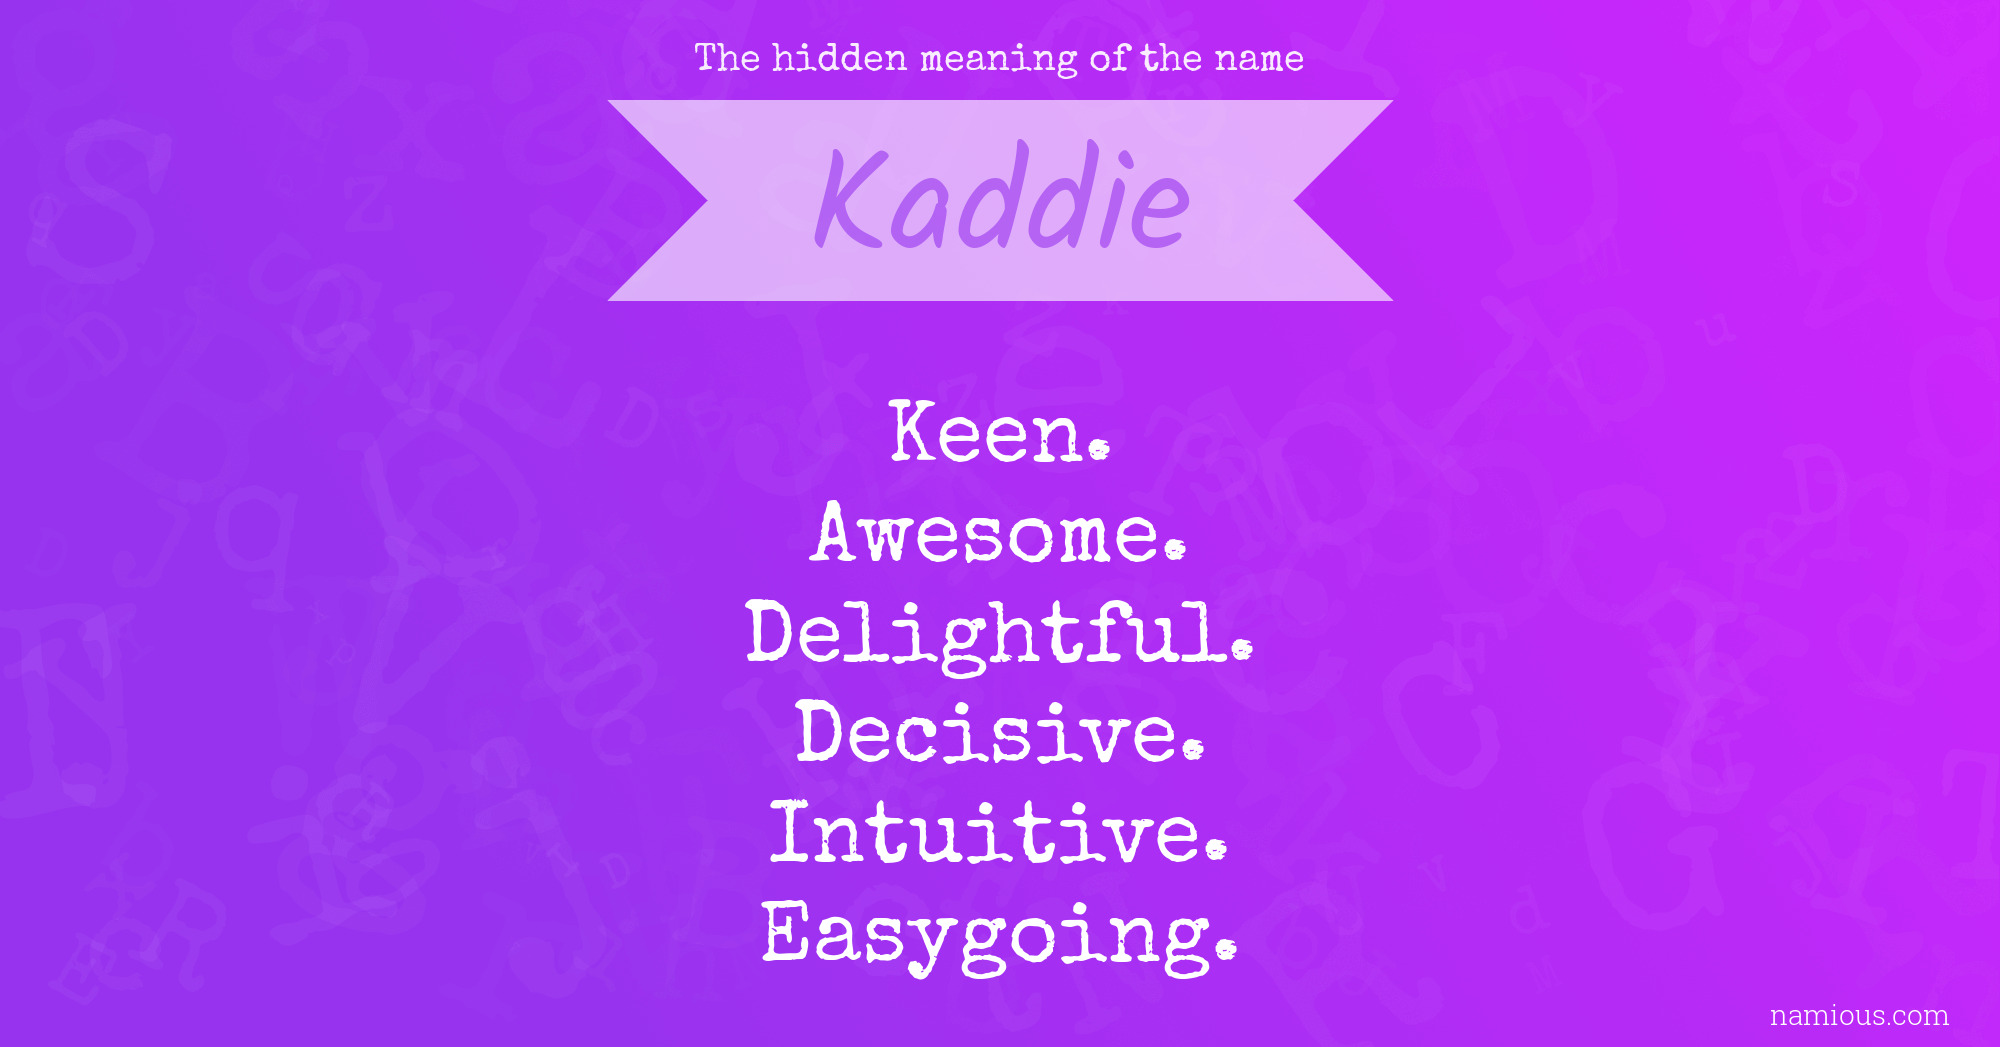 The hidden meaning of the name Kaddie